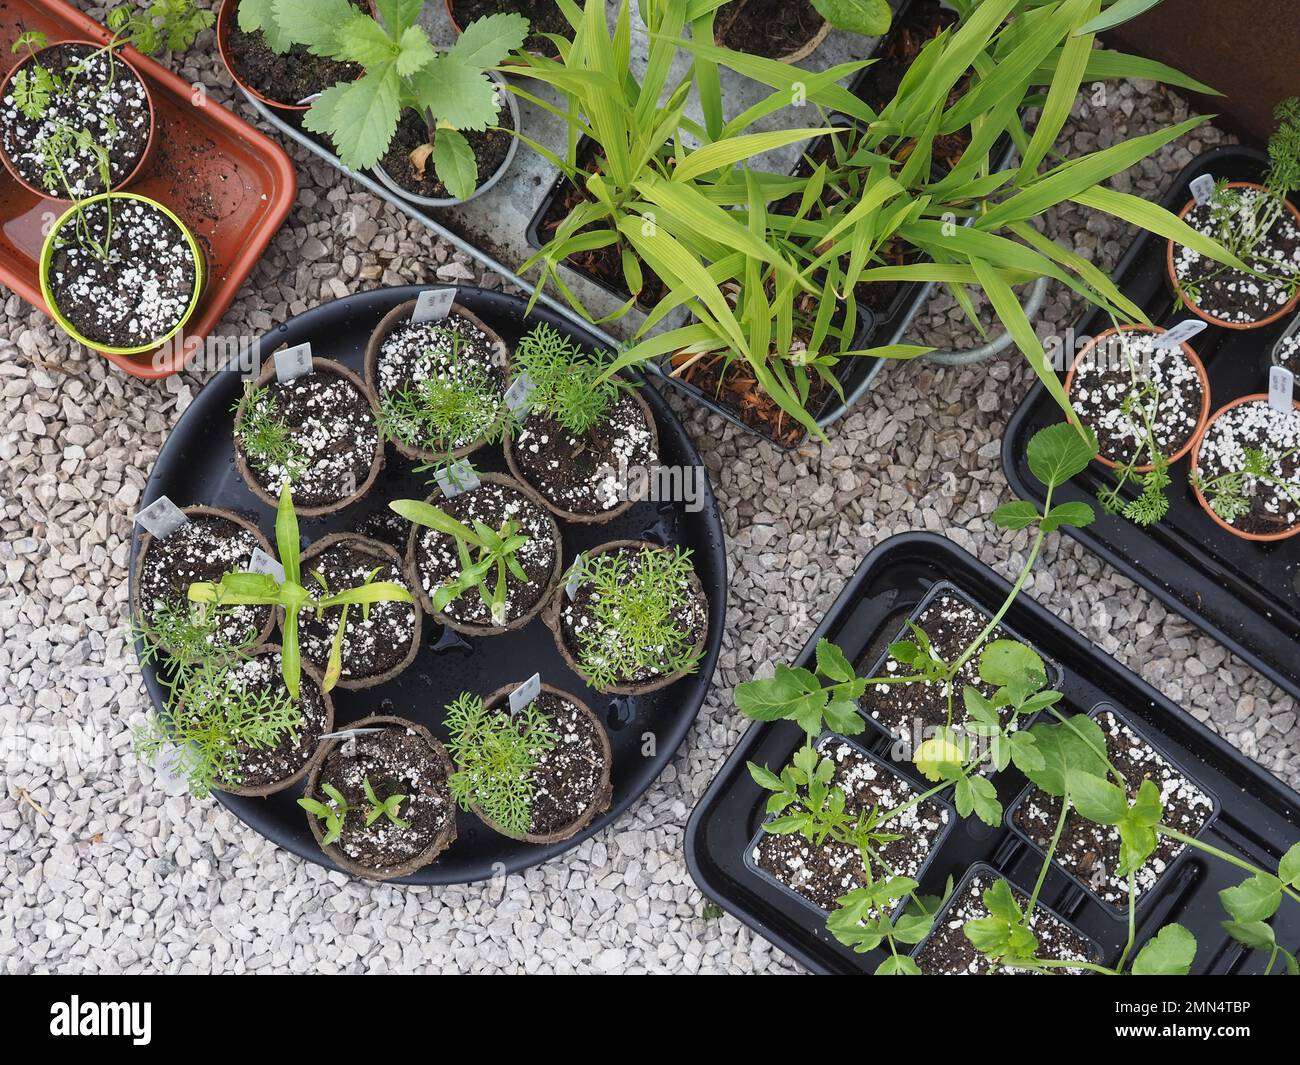 Hardy annual seedling pricked out into small pots and being hardened off outside ready to be planted into a cutting garden. Shot from above. Stock Photo